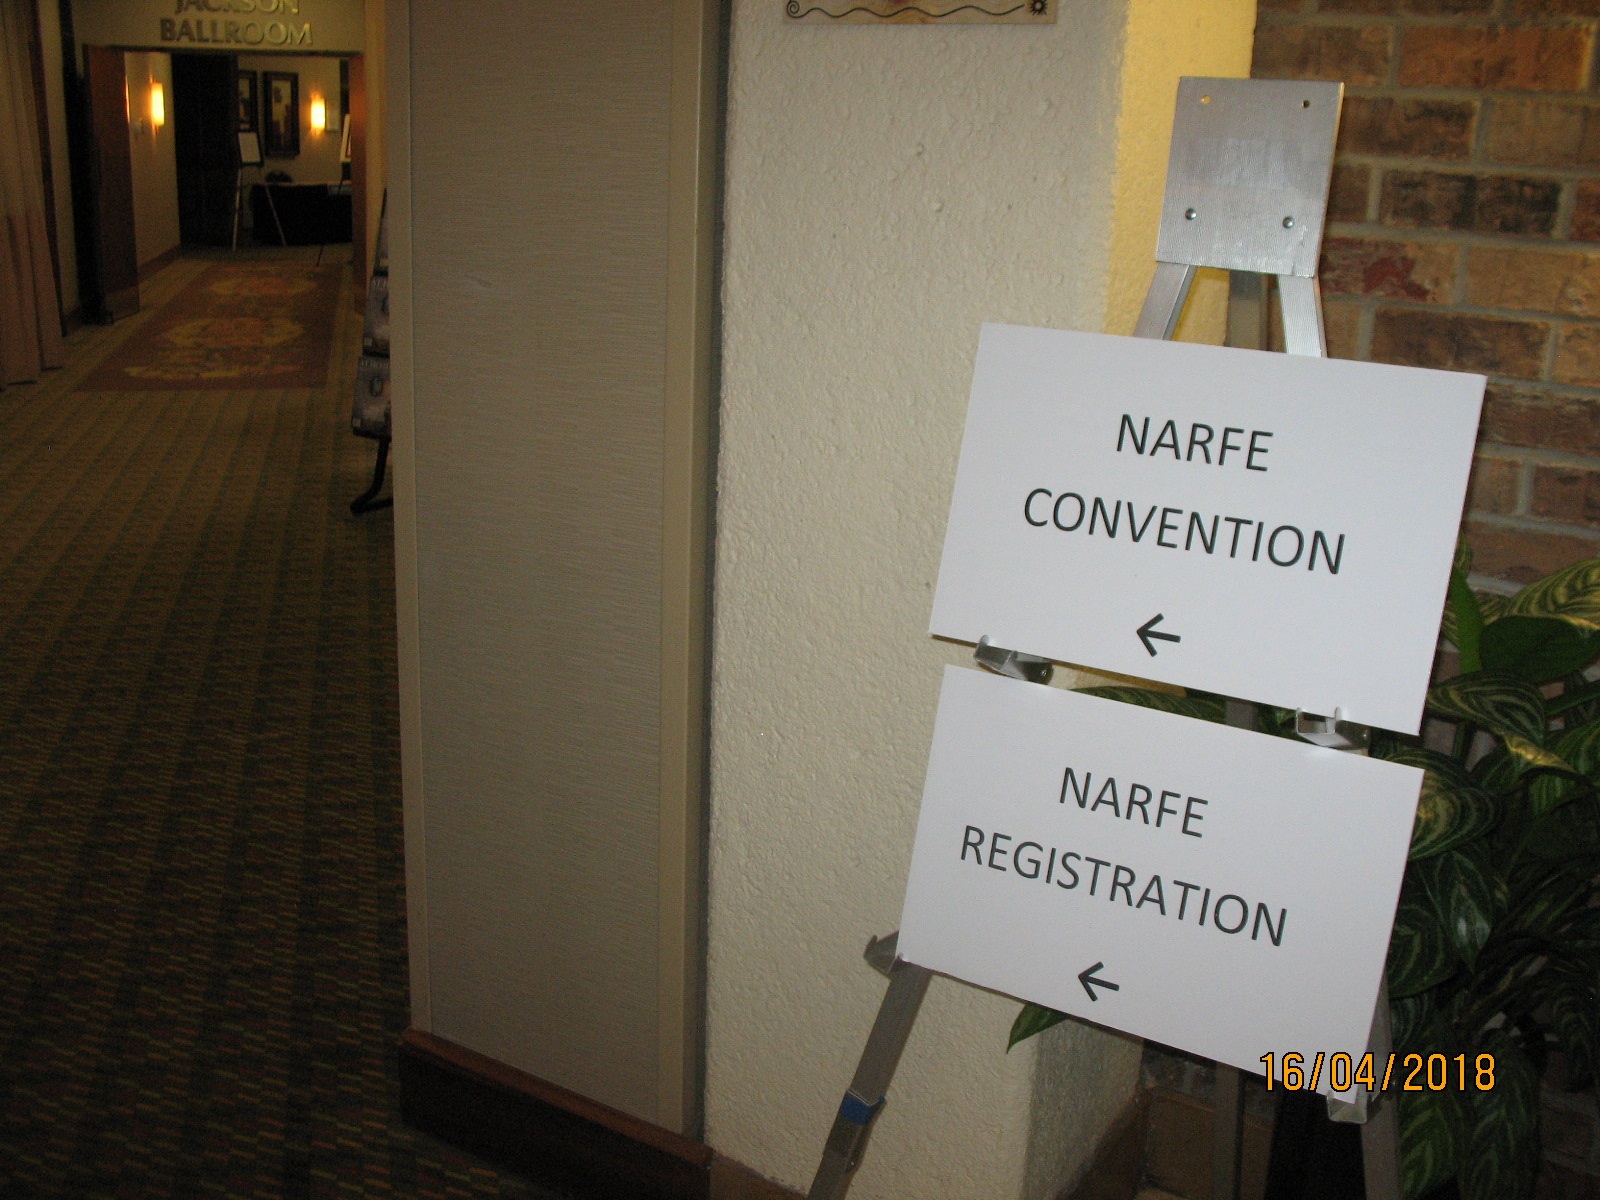 This way to the Convention